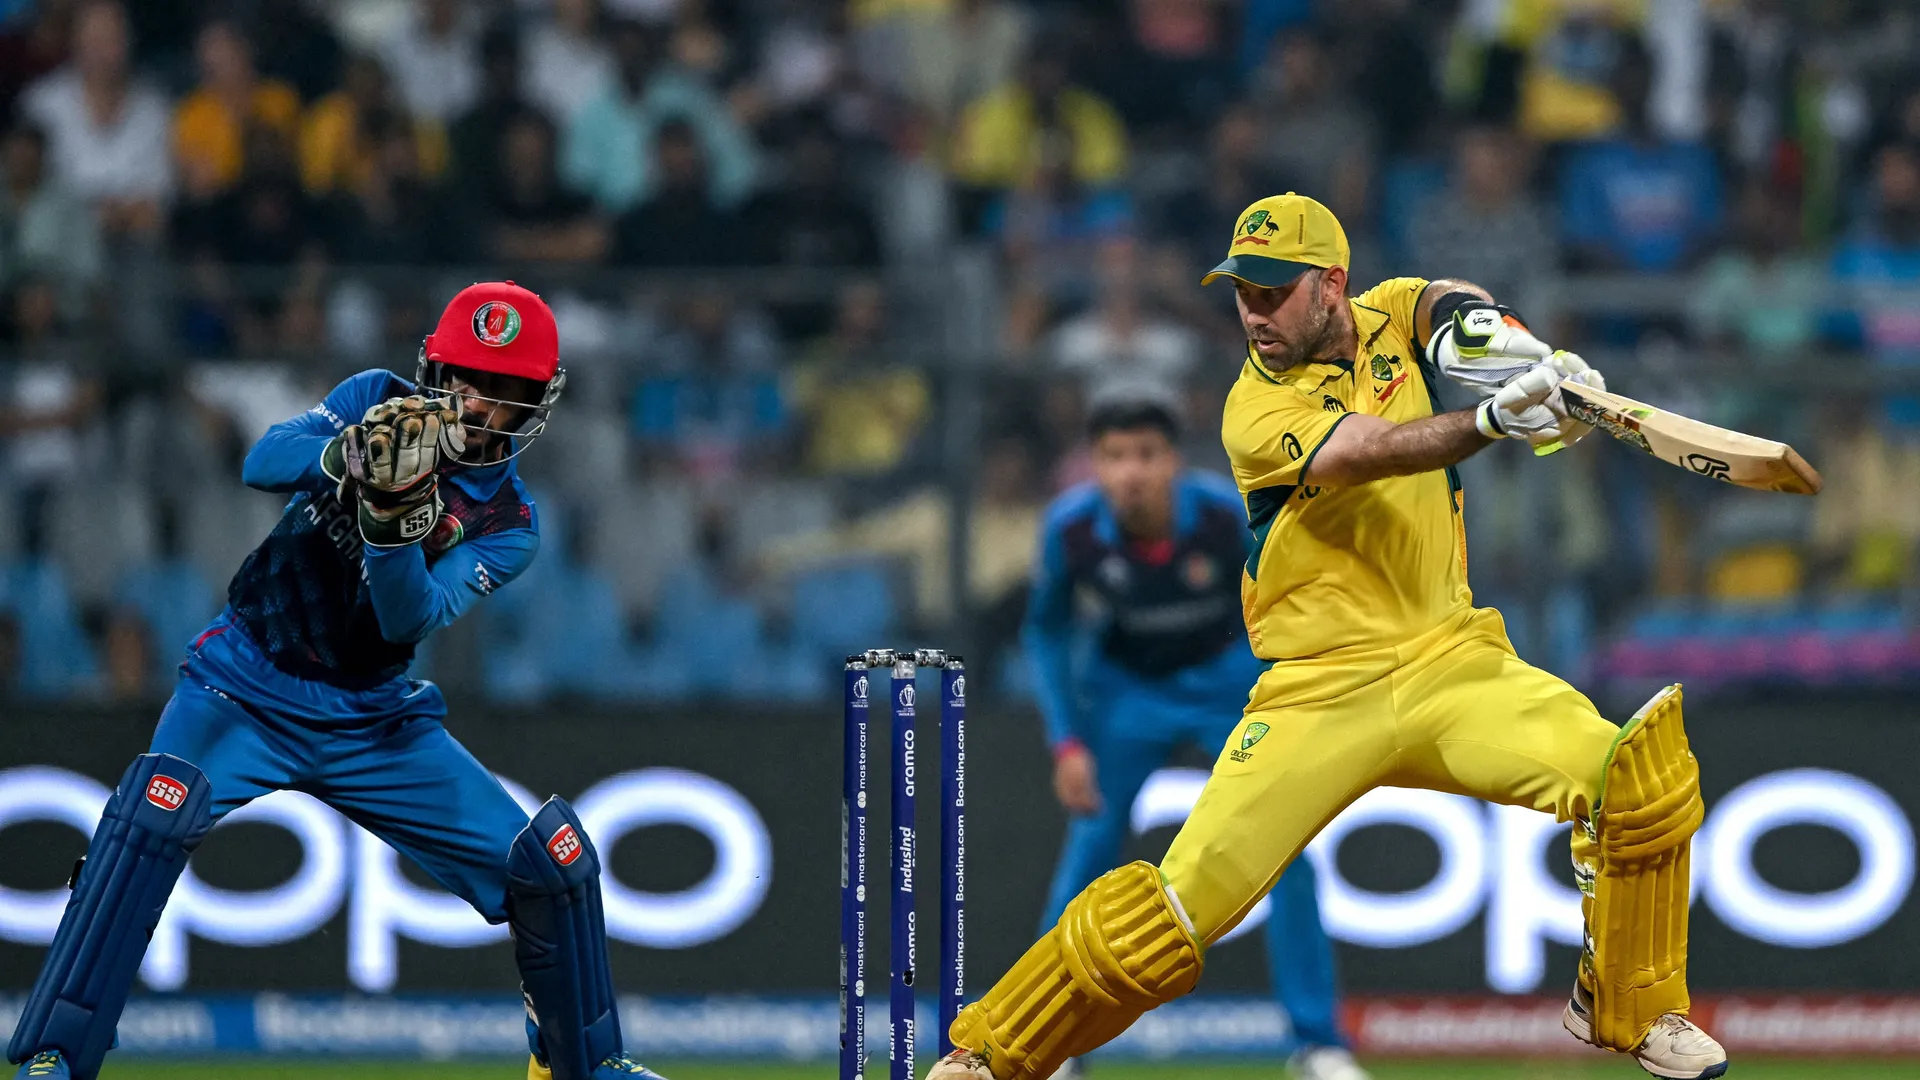 A brilliant double century from injured Glenn Maxwell helps Australia to a famous victory.